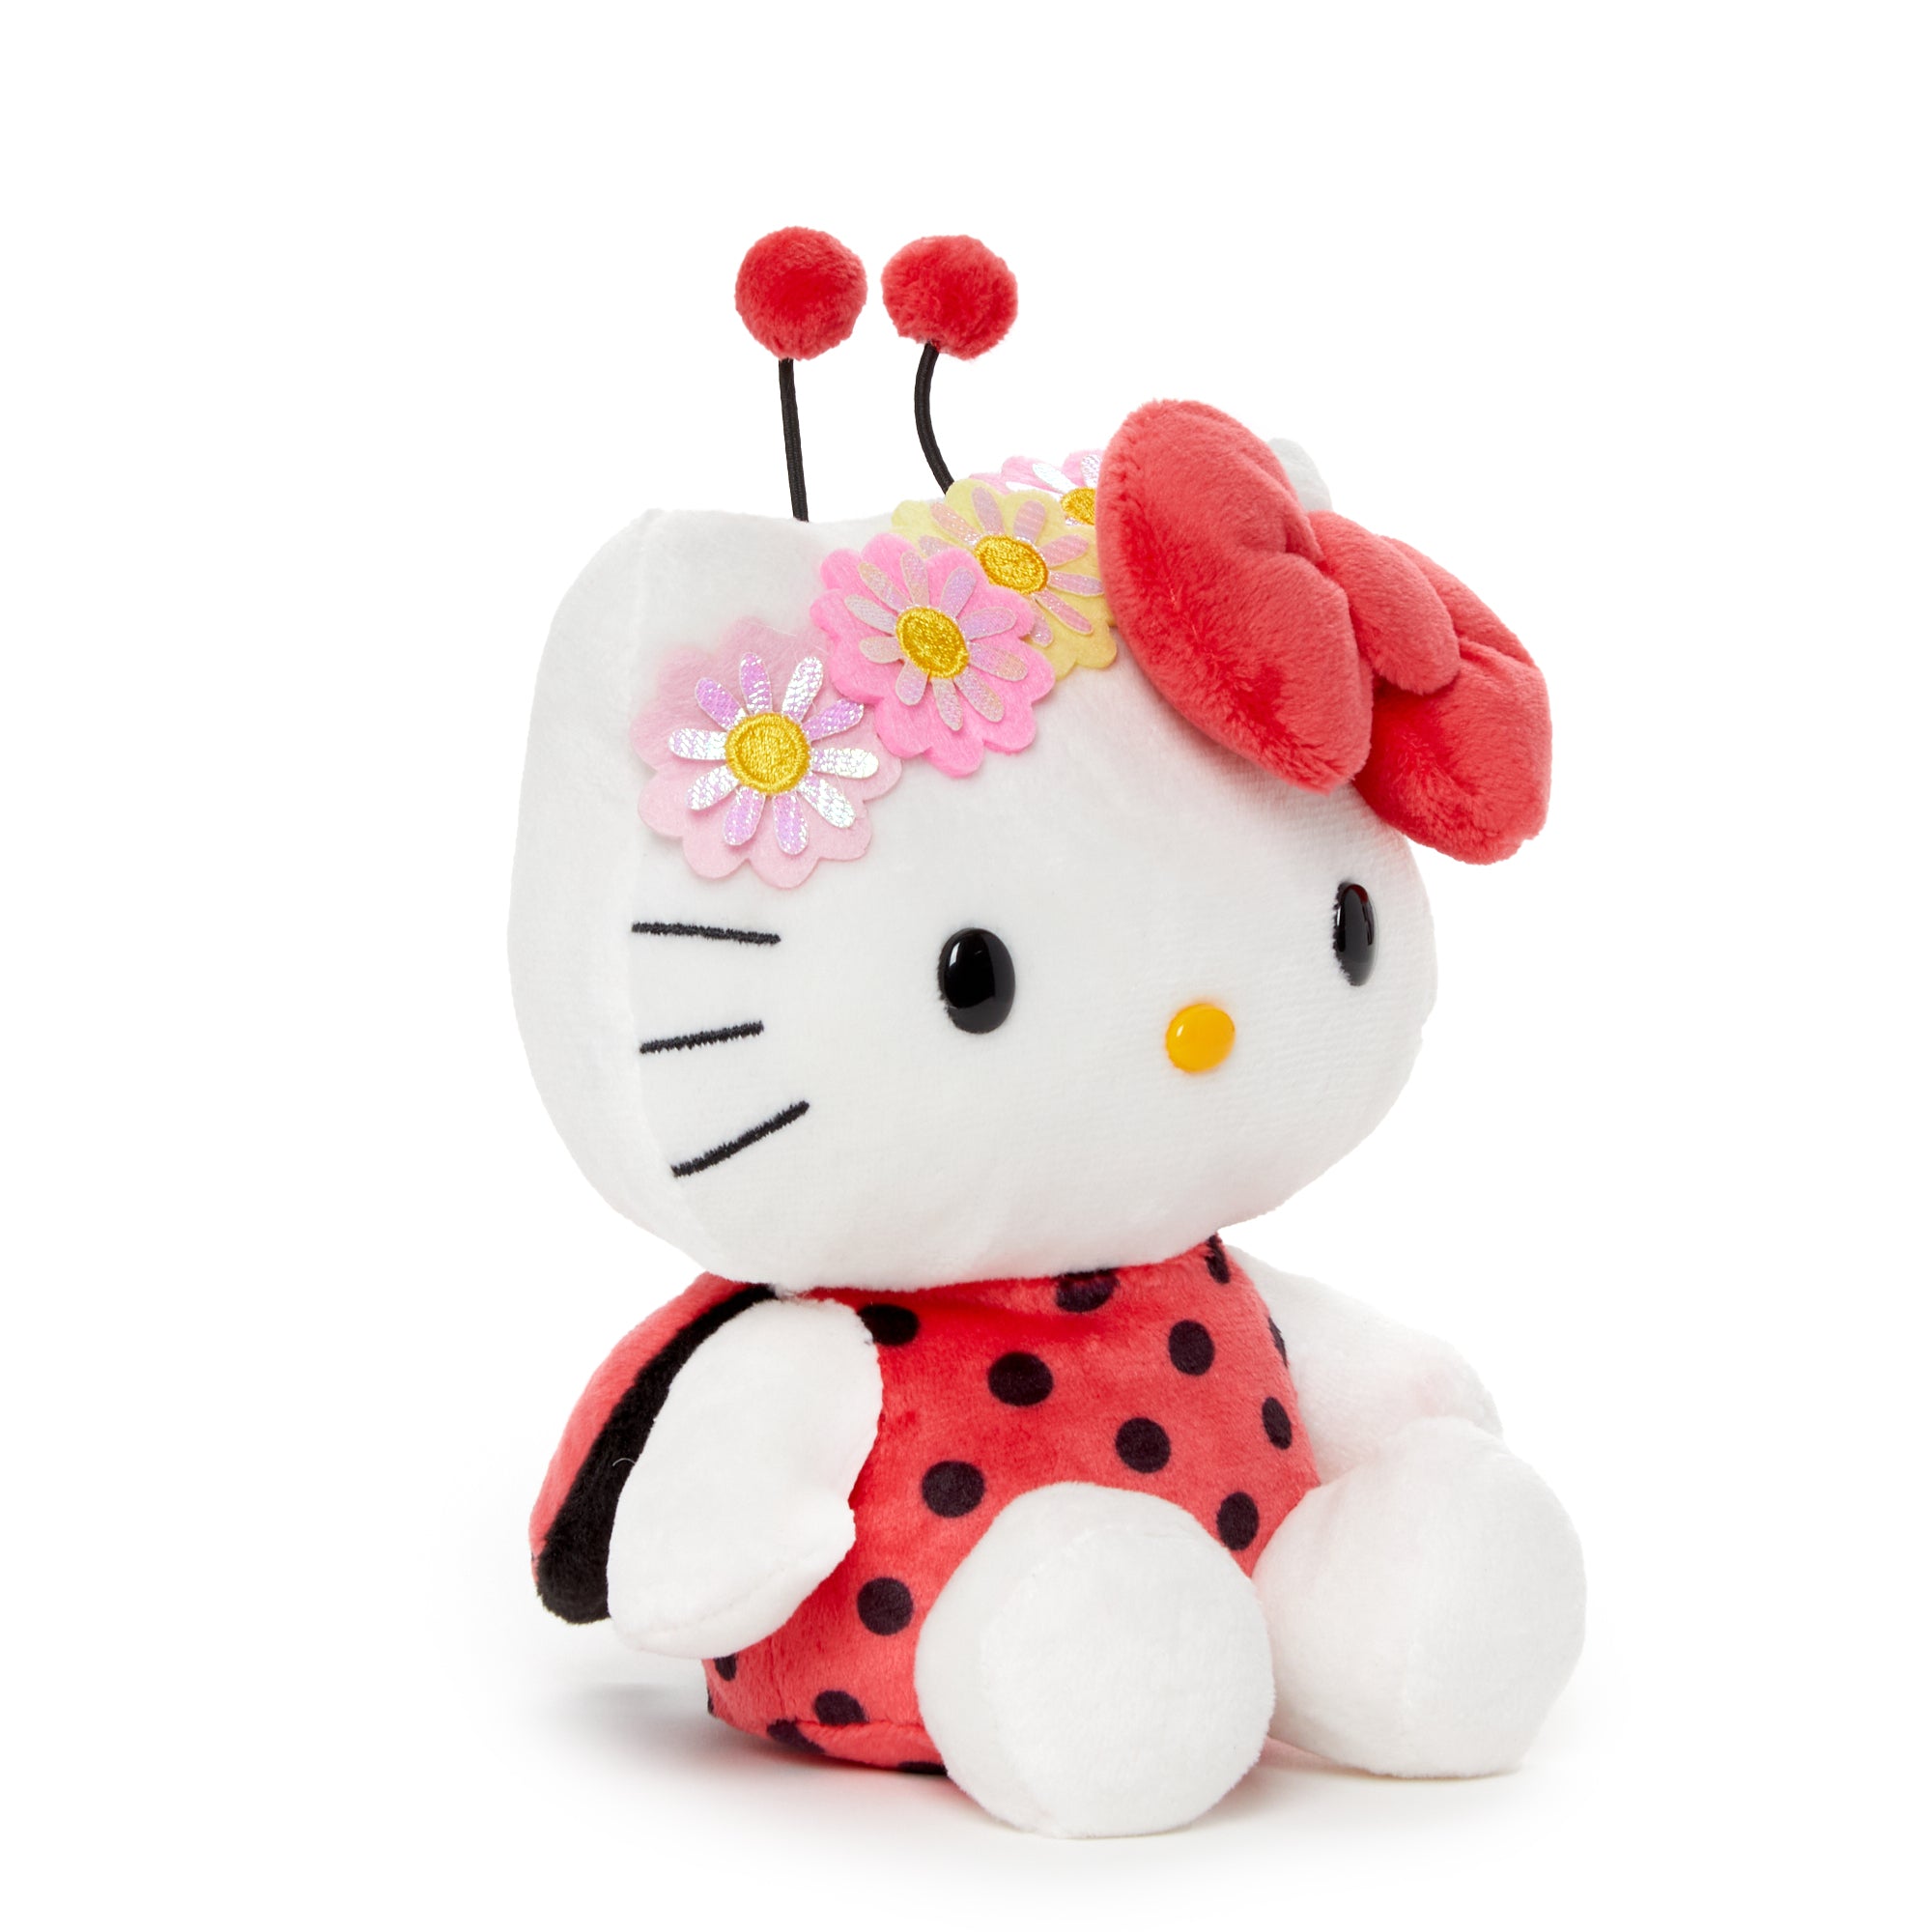 ❤️ New Sanrio 💞 + Gothic Gifts Clearance 🦇 + Pop Culture 😍 + more! ❤️ -  Beserk